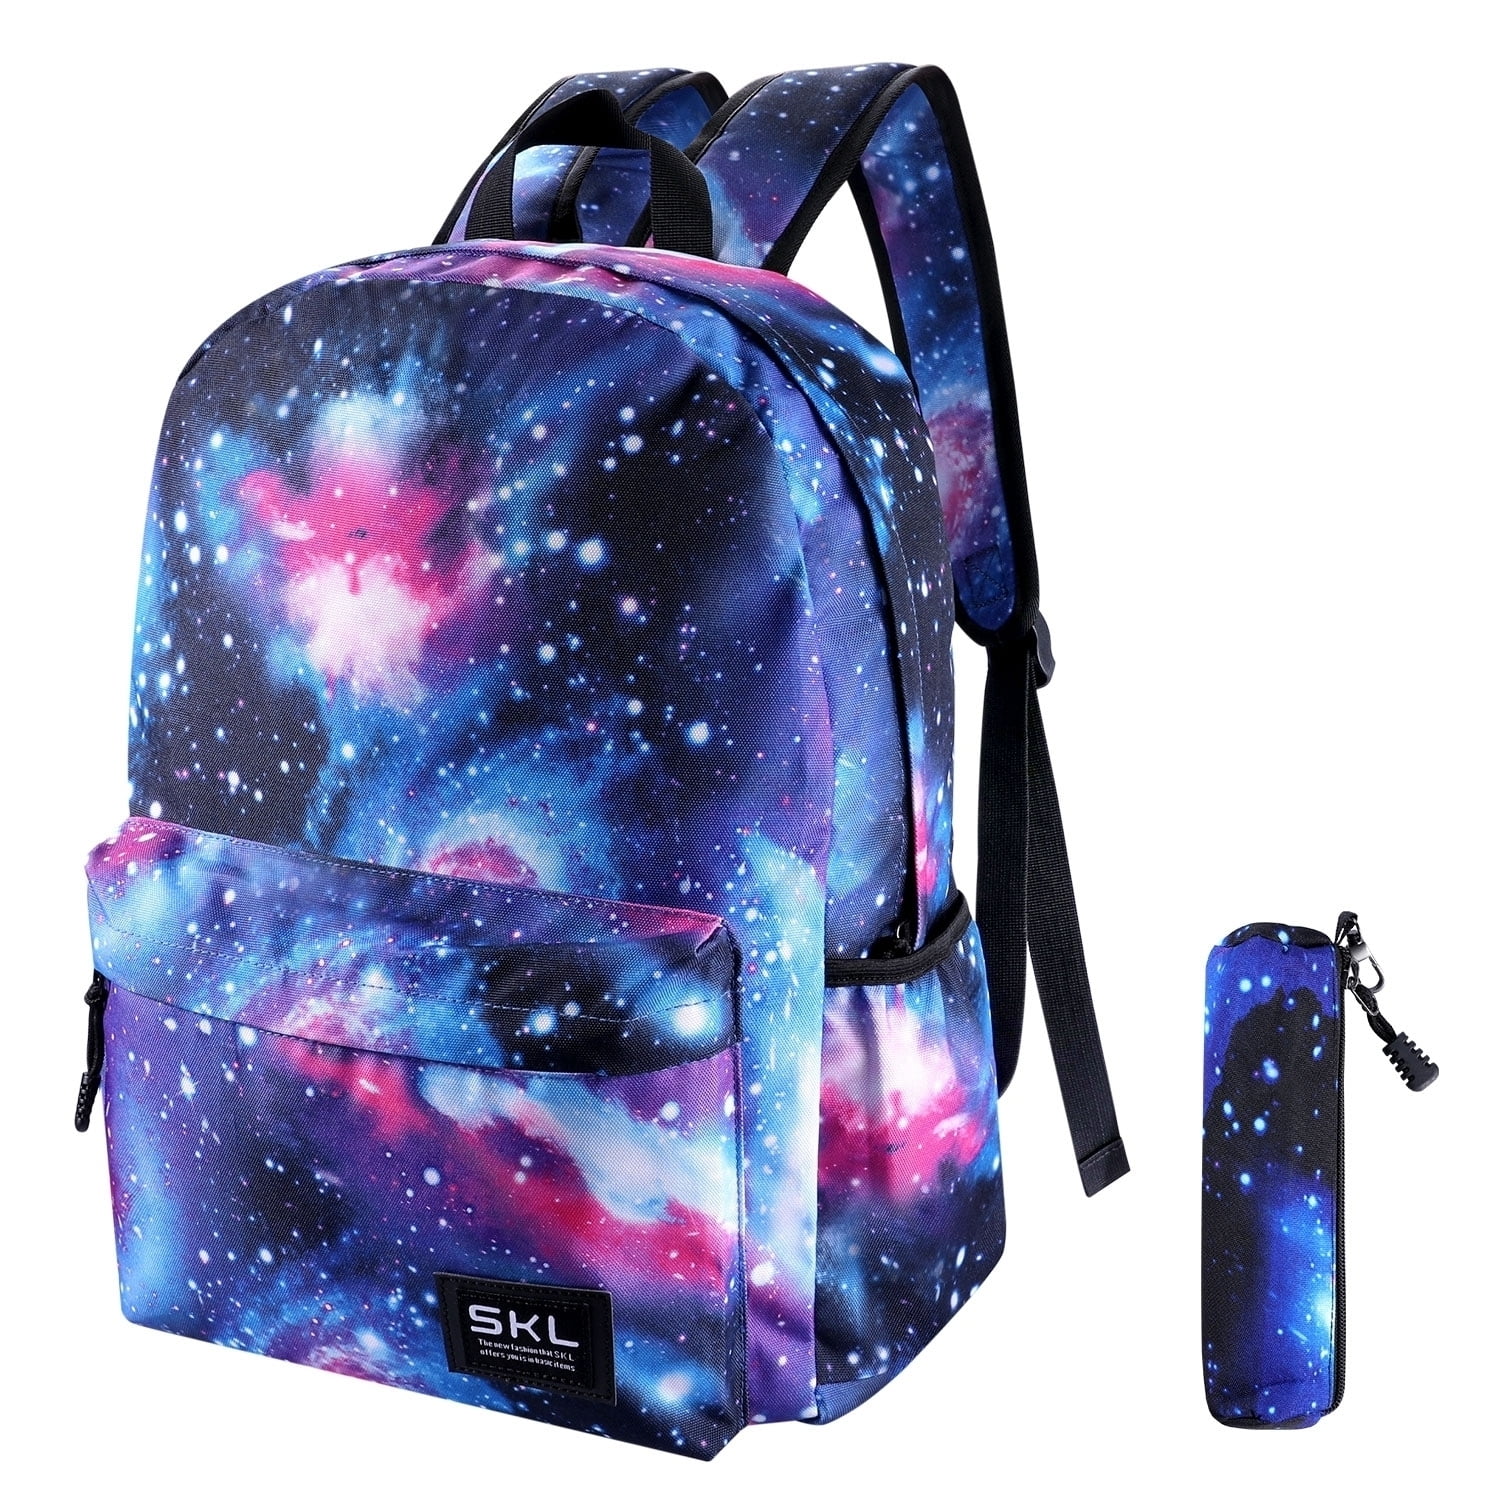 G-i-Mall Unisex Galaxy School Backpack Canvas Backpack Laptop Book Bag Galaxy Le 